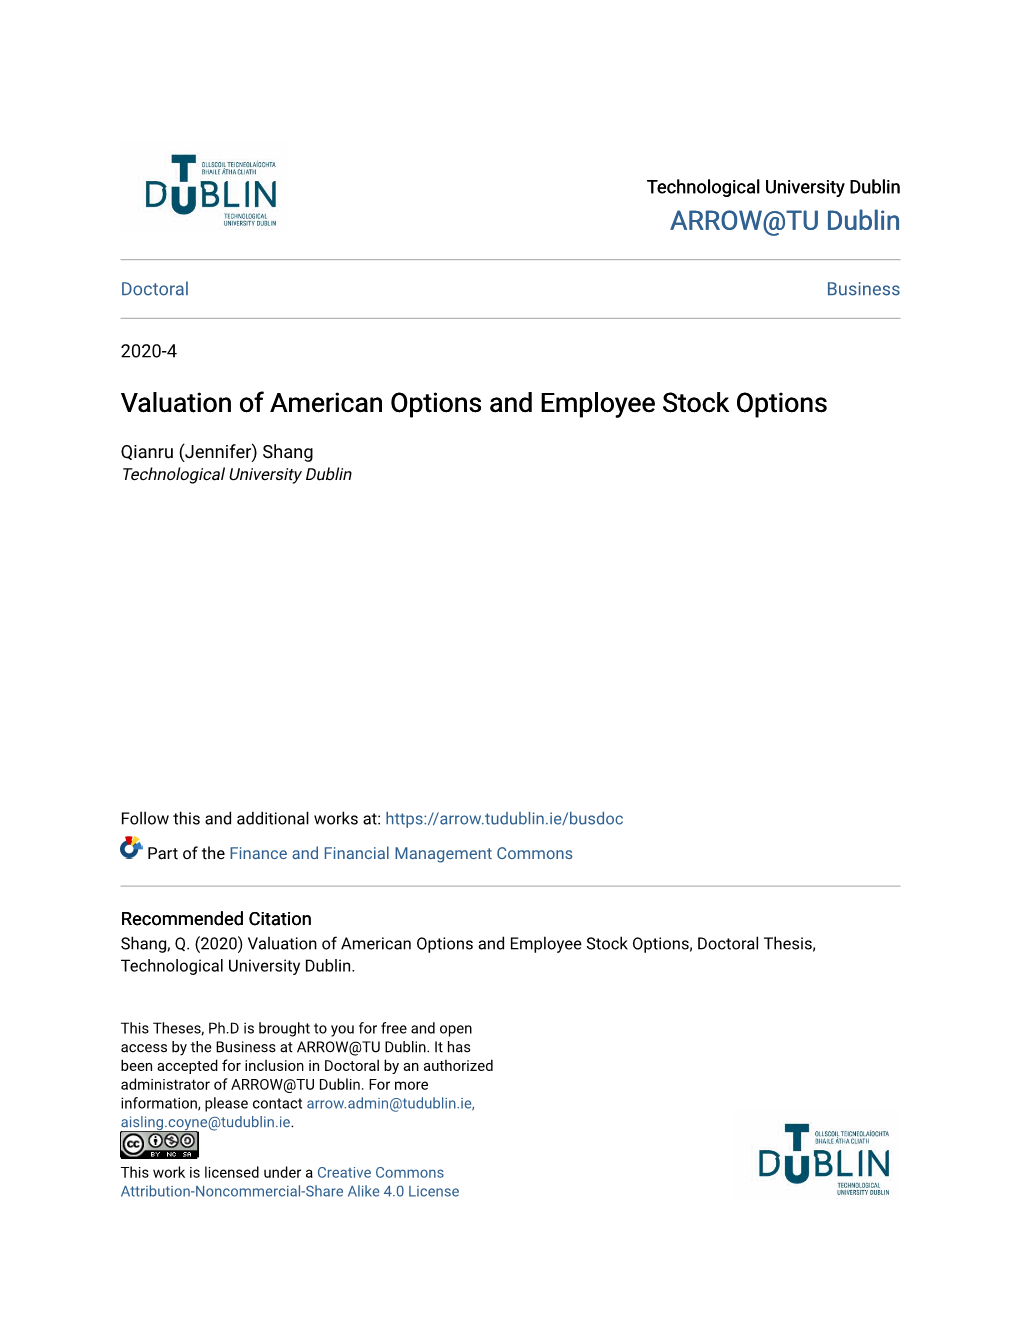 Valuation of American Options and Employee Stock Options